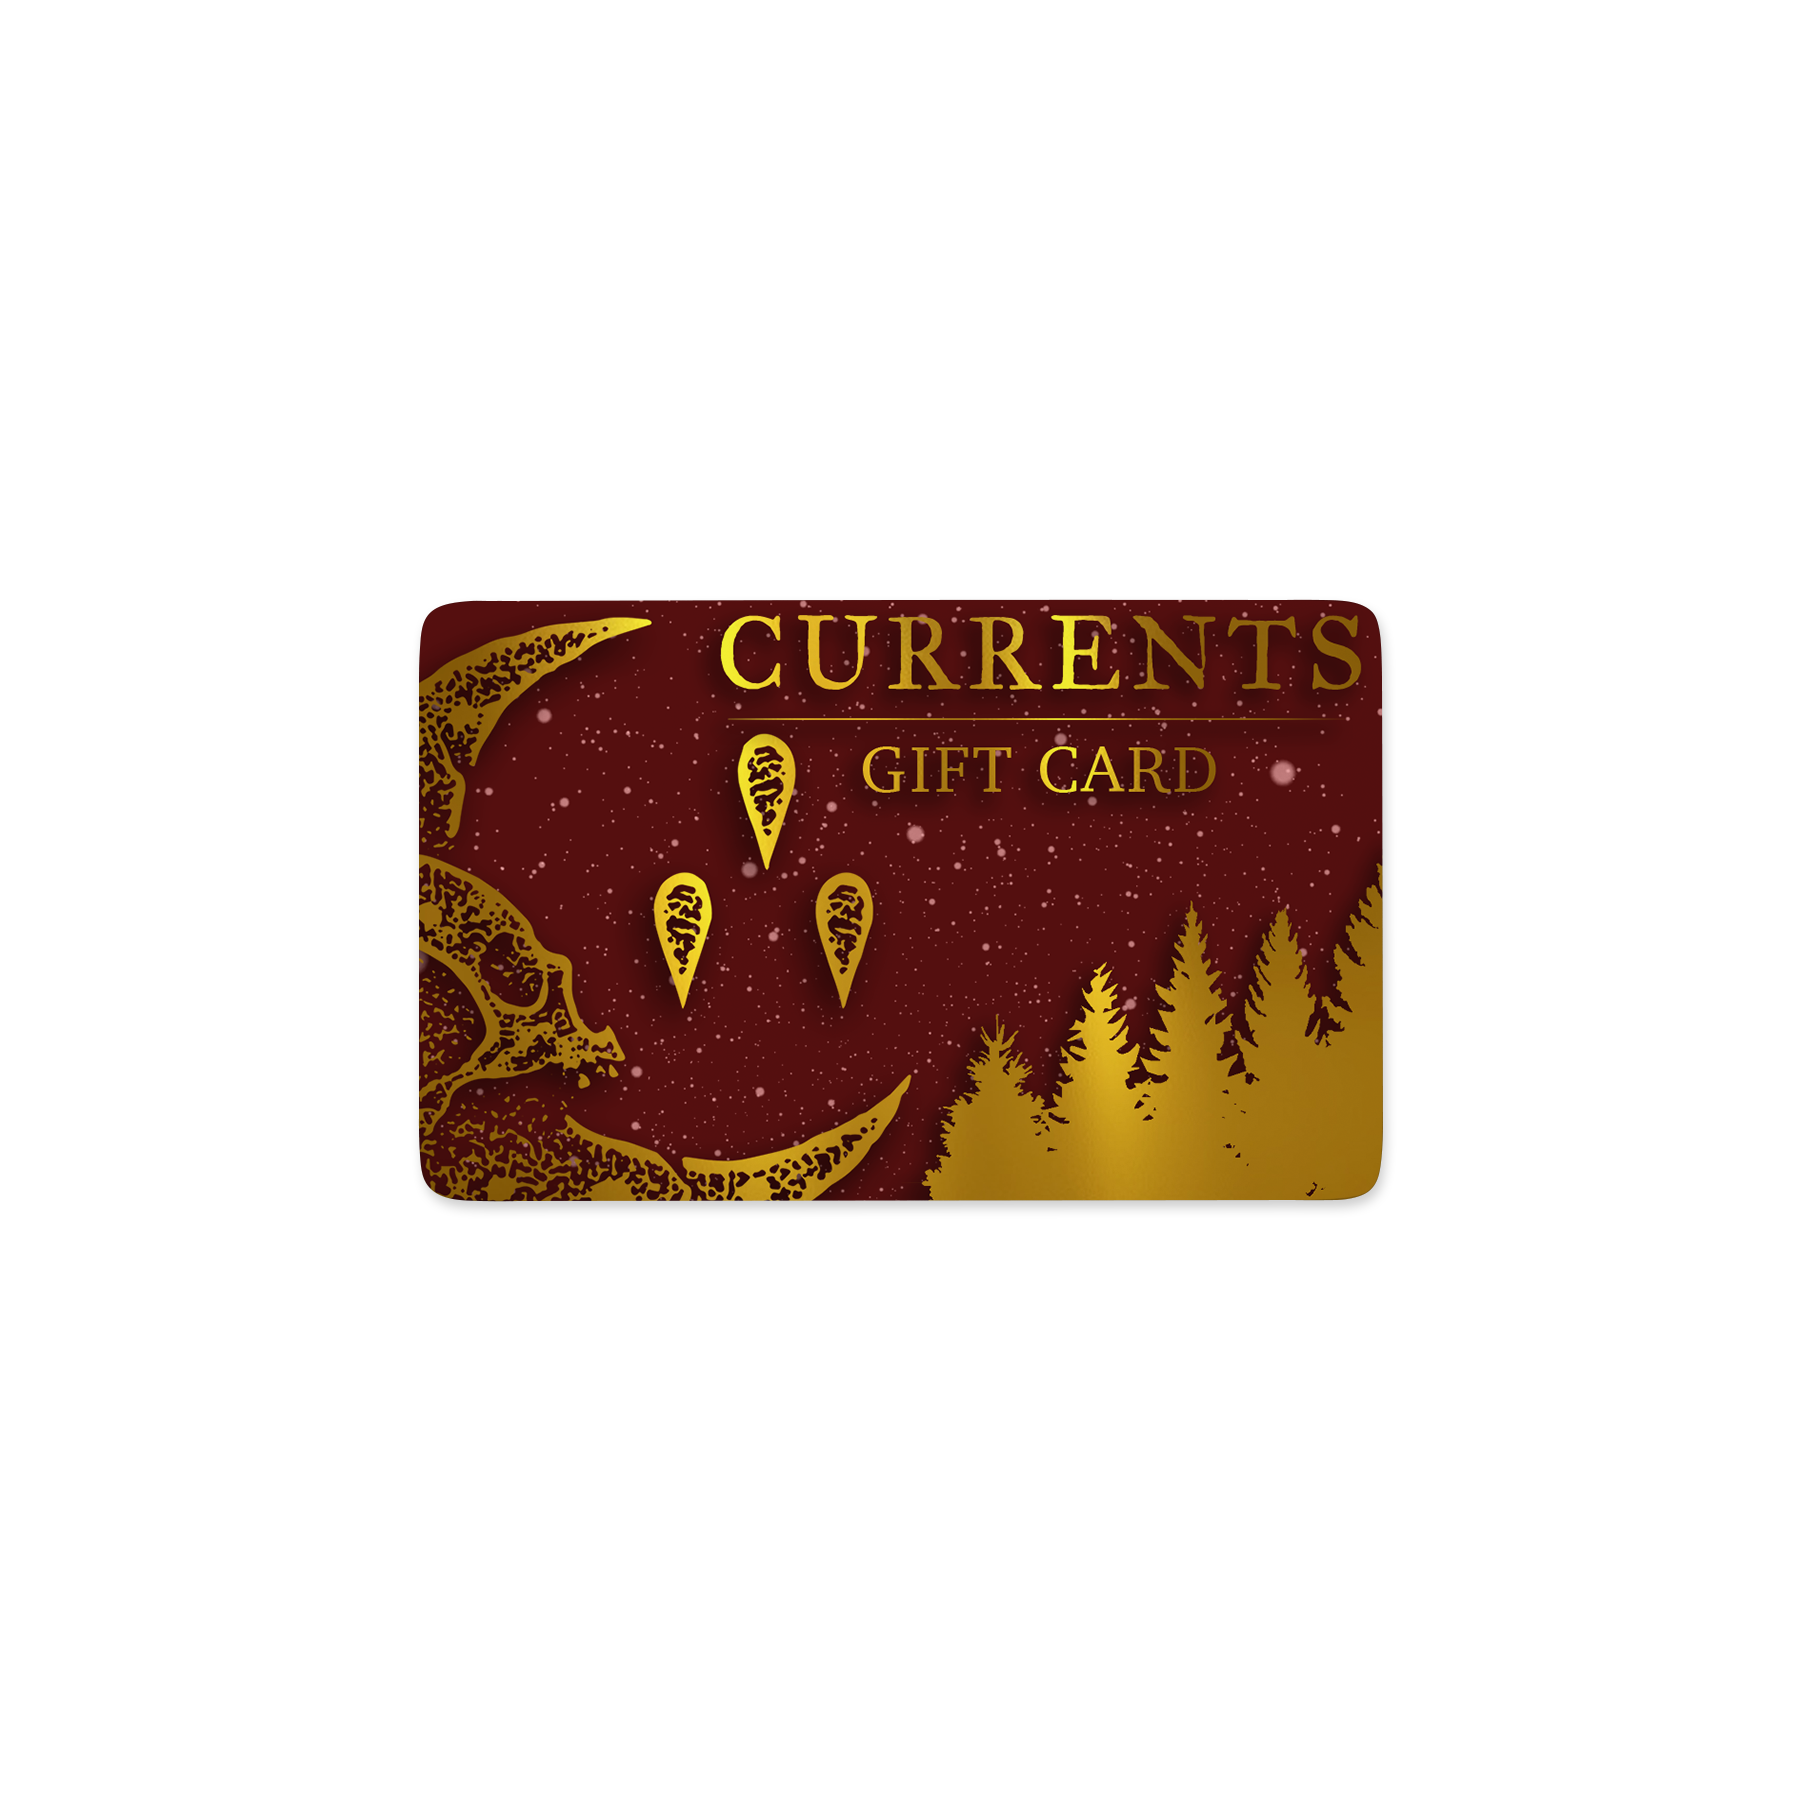 Currents Official Merchandise gift card